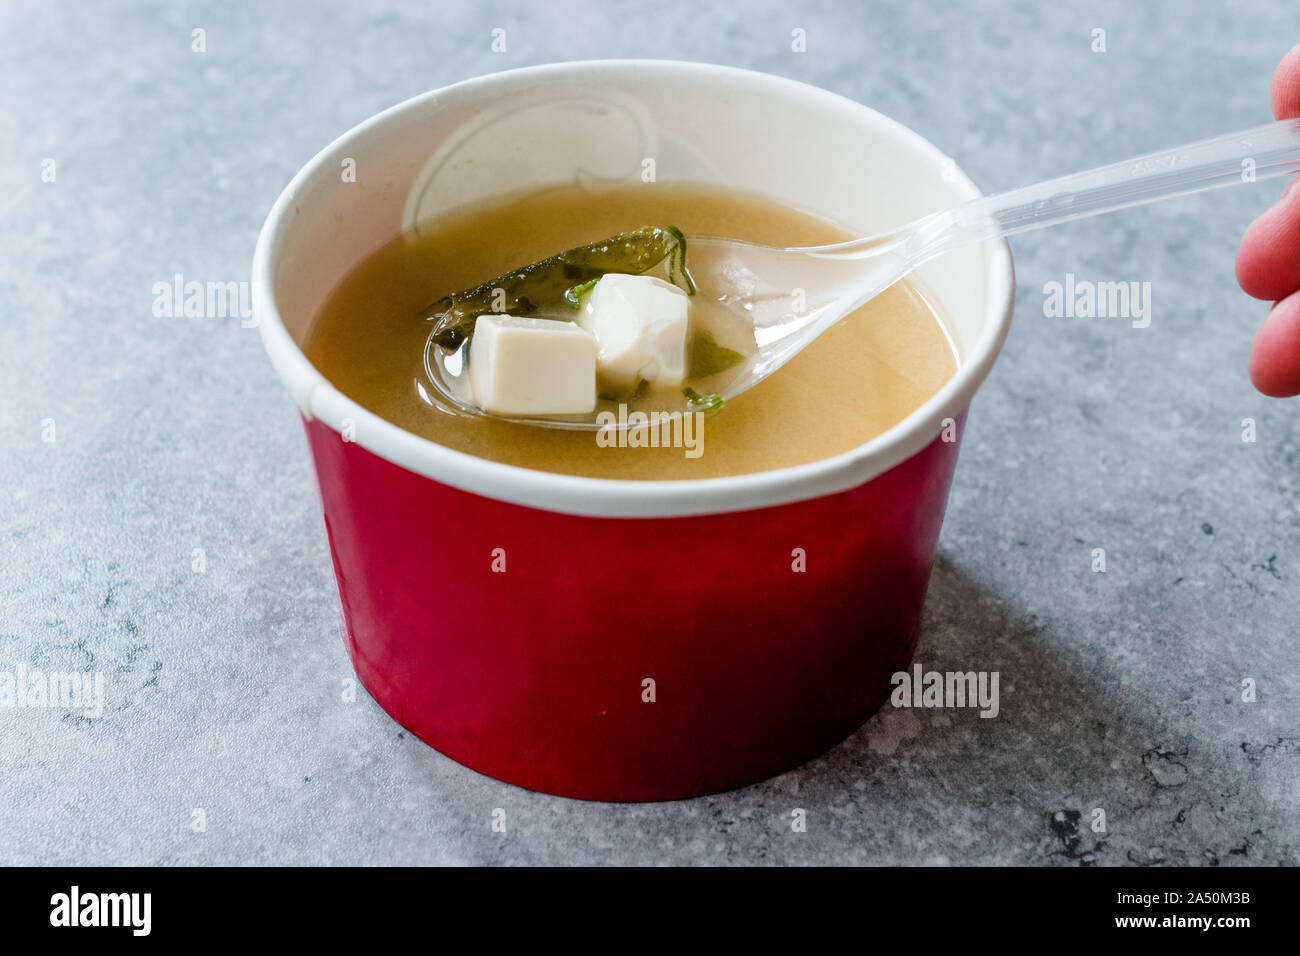 Takeout Container Of Chinese Wonton Soup With Chopsticks On A